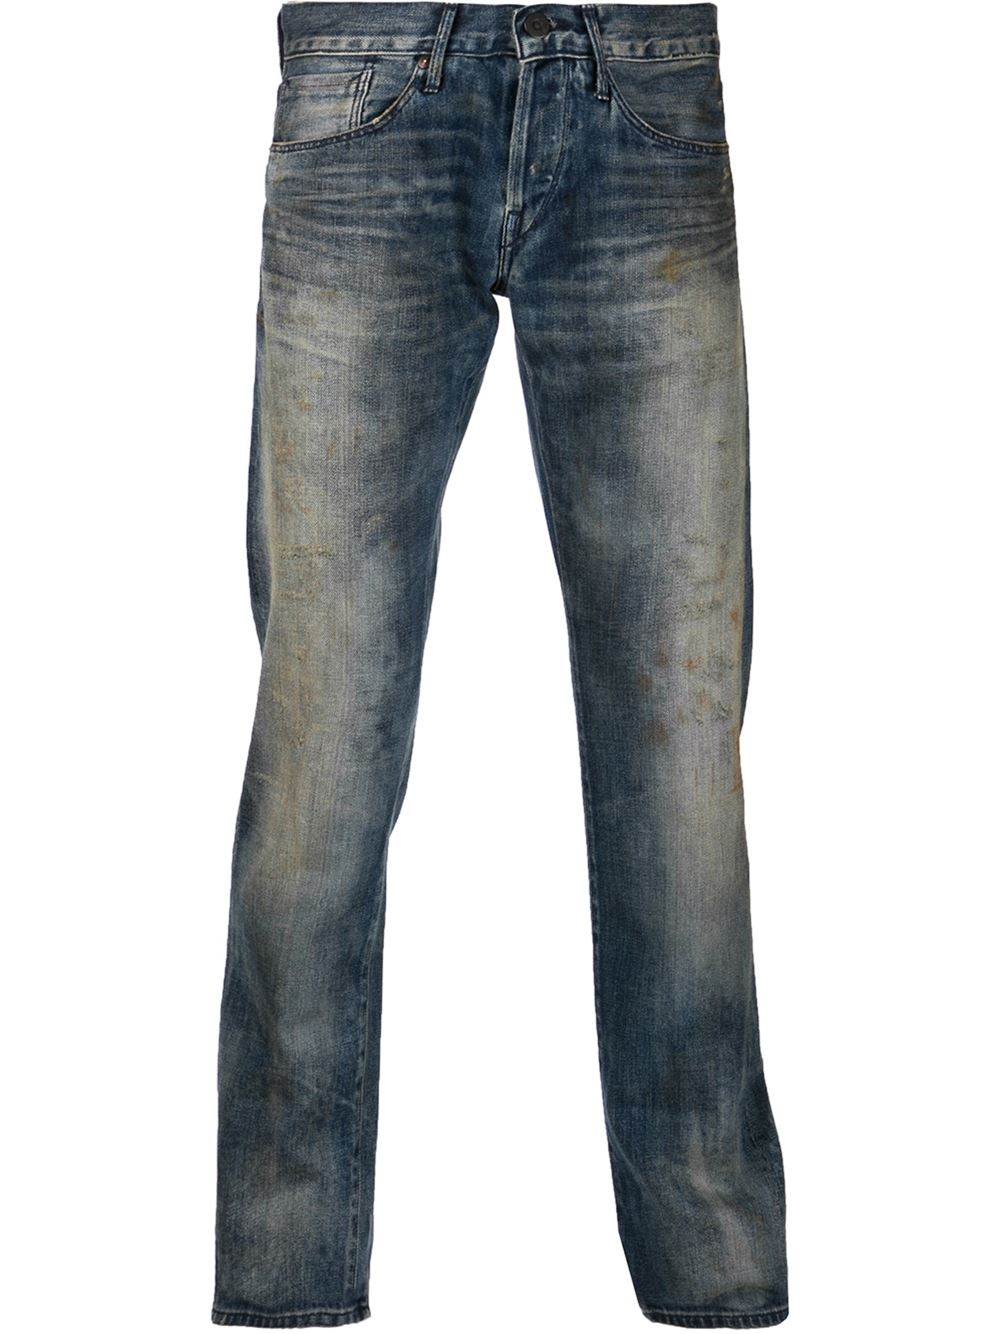 Lyst - 3X1 Faded Wash Jeans in Blue for Men